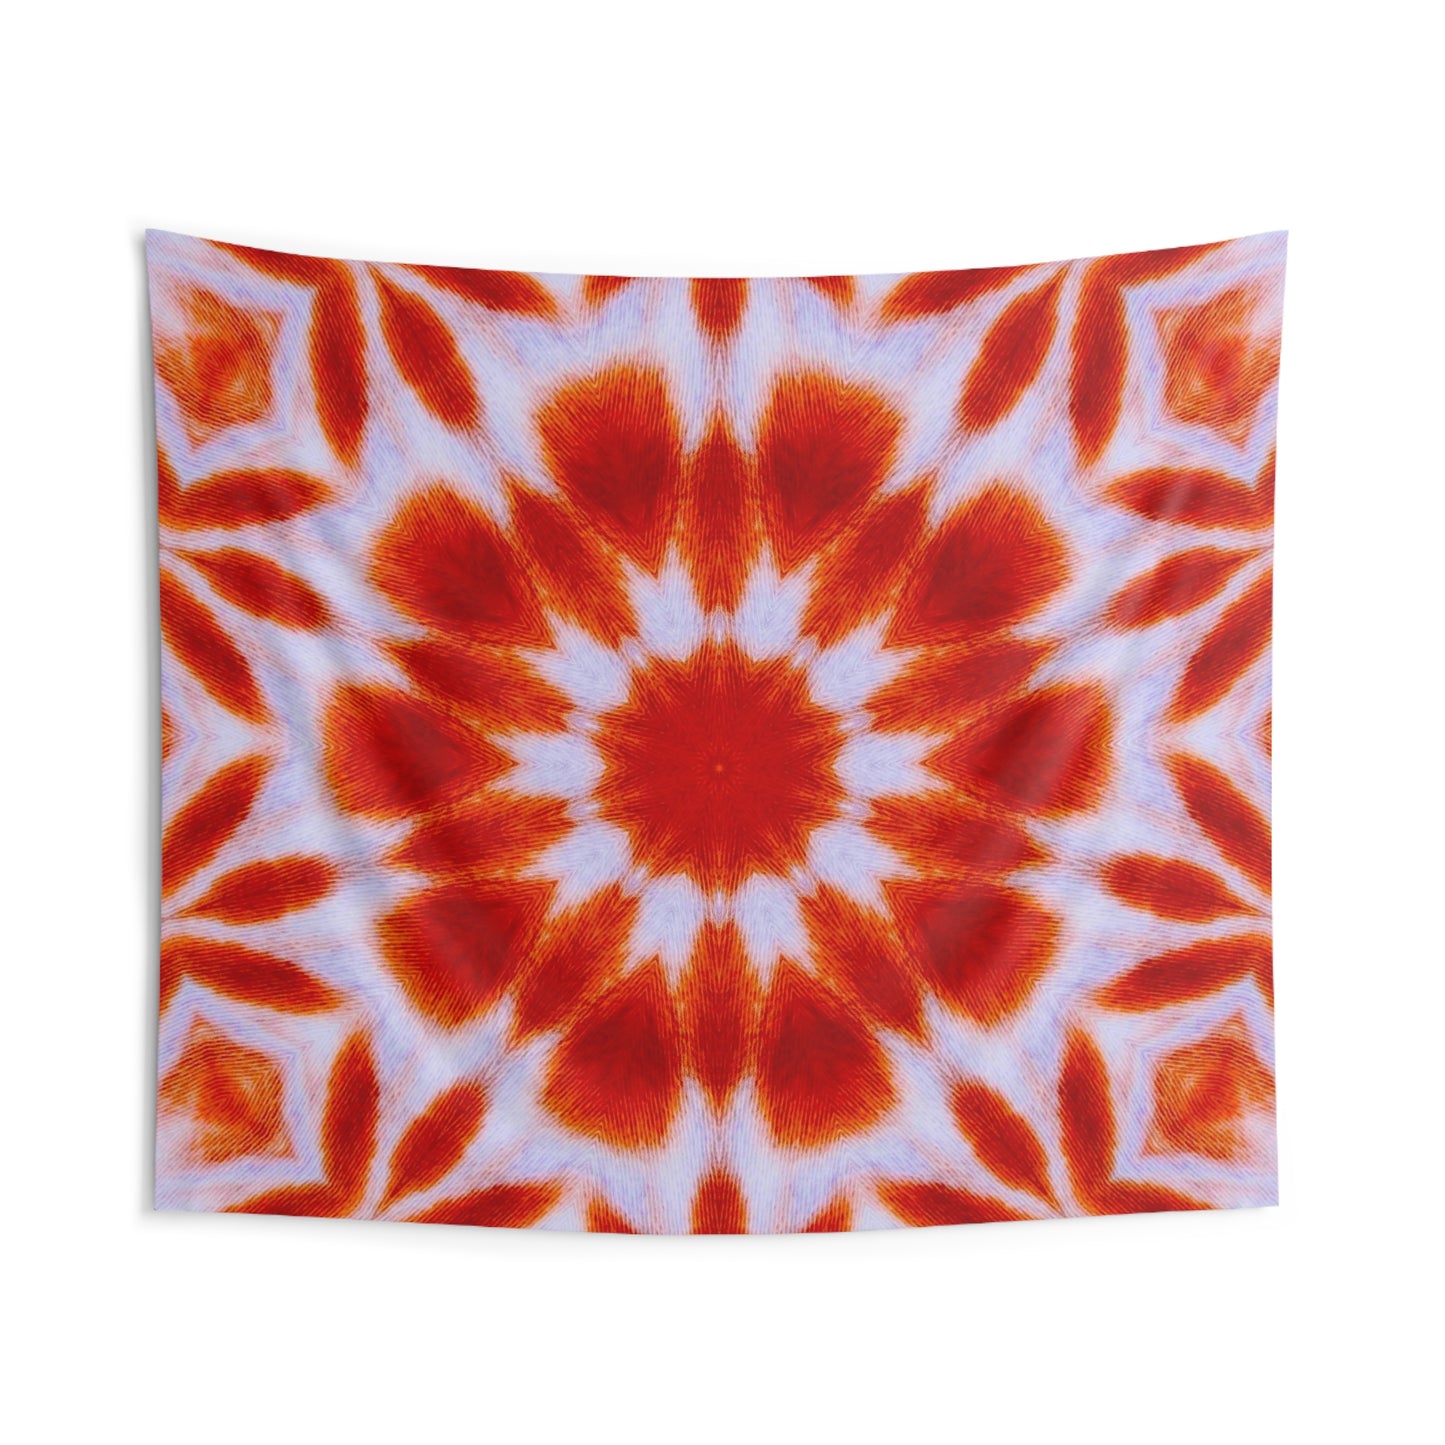 Kaleido47 Cymatic Wall Tapestry (SACRAL)